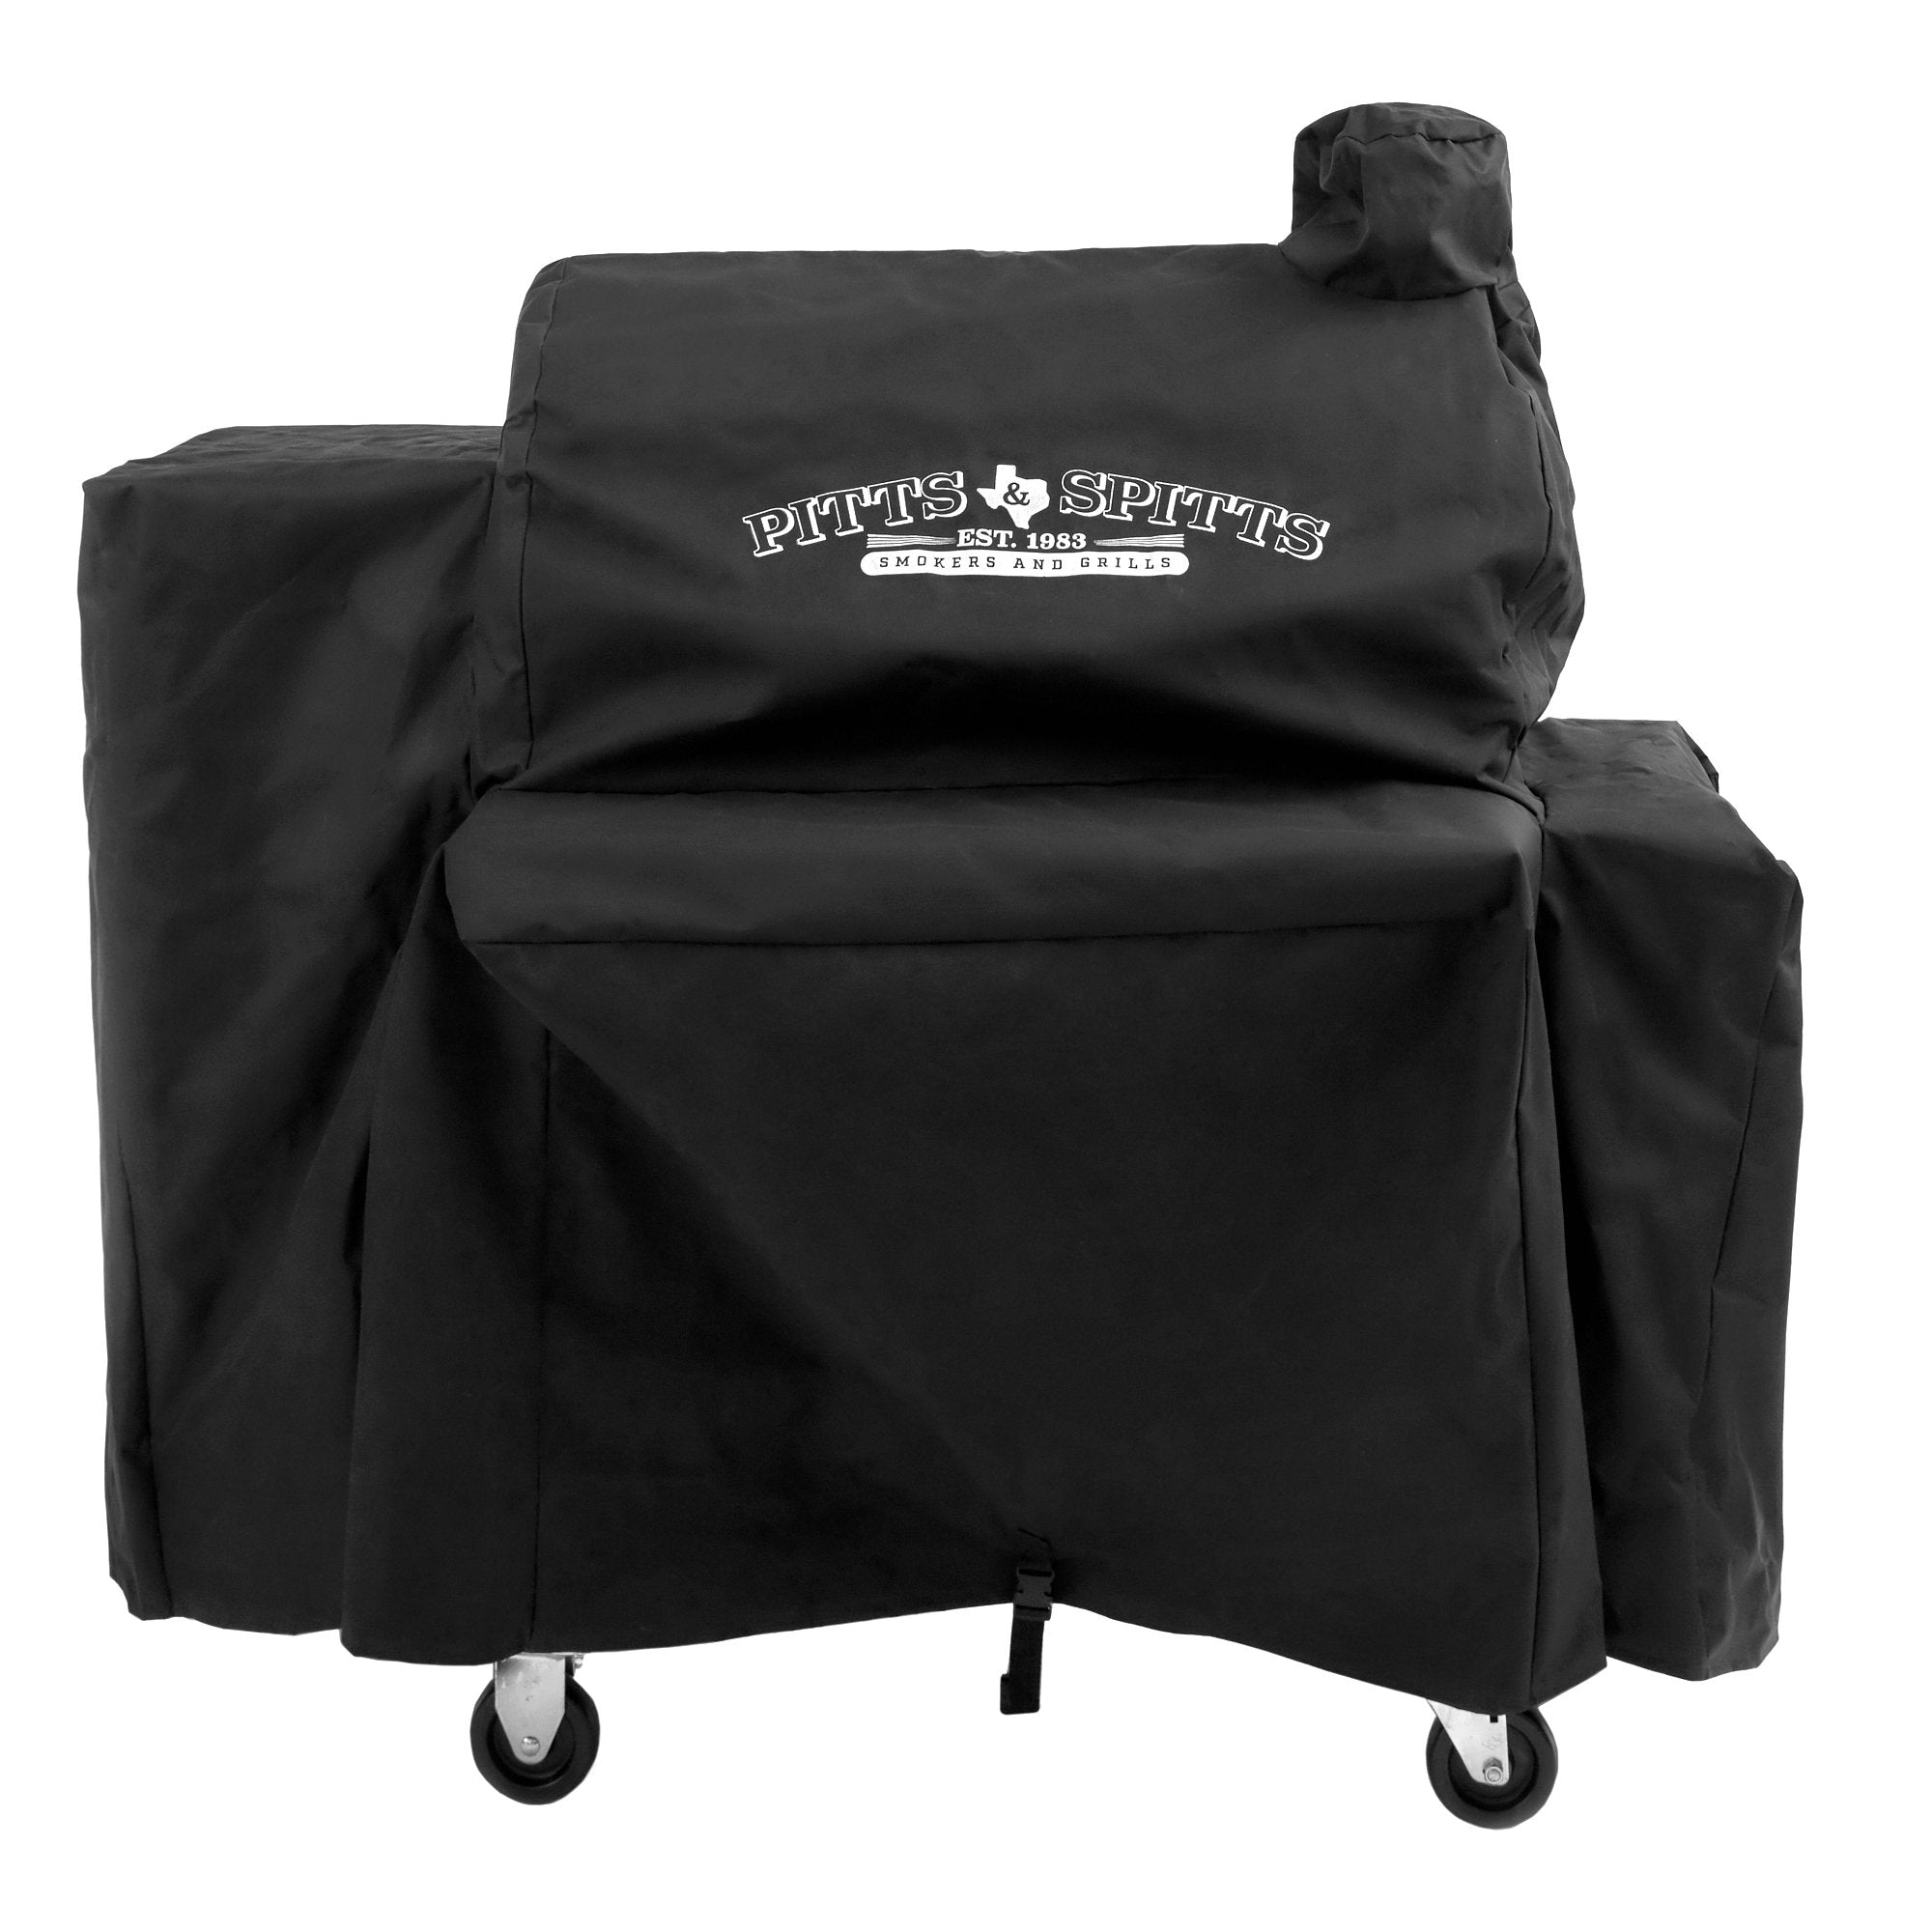 Pitts and Spitts Maverick Pellet Grill Cover